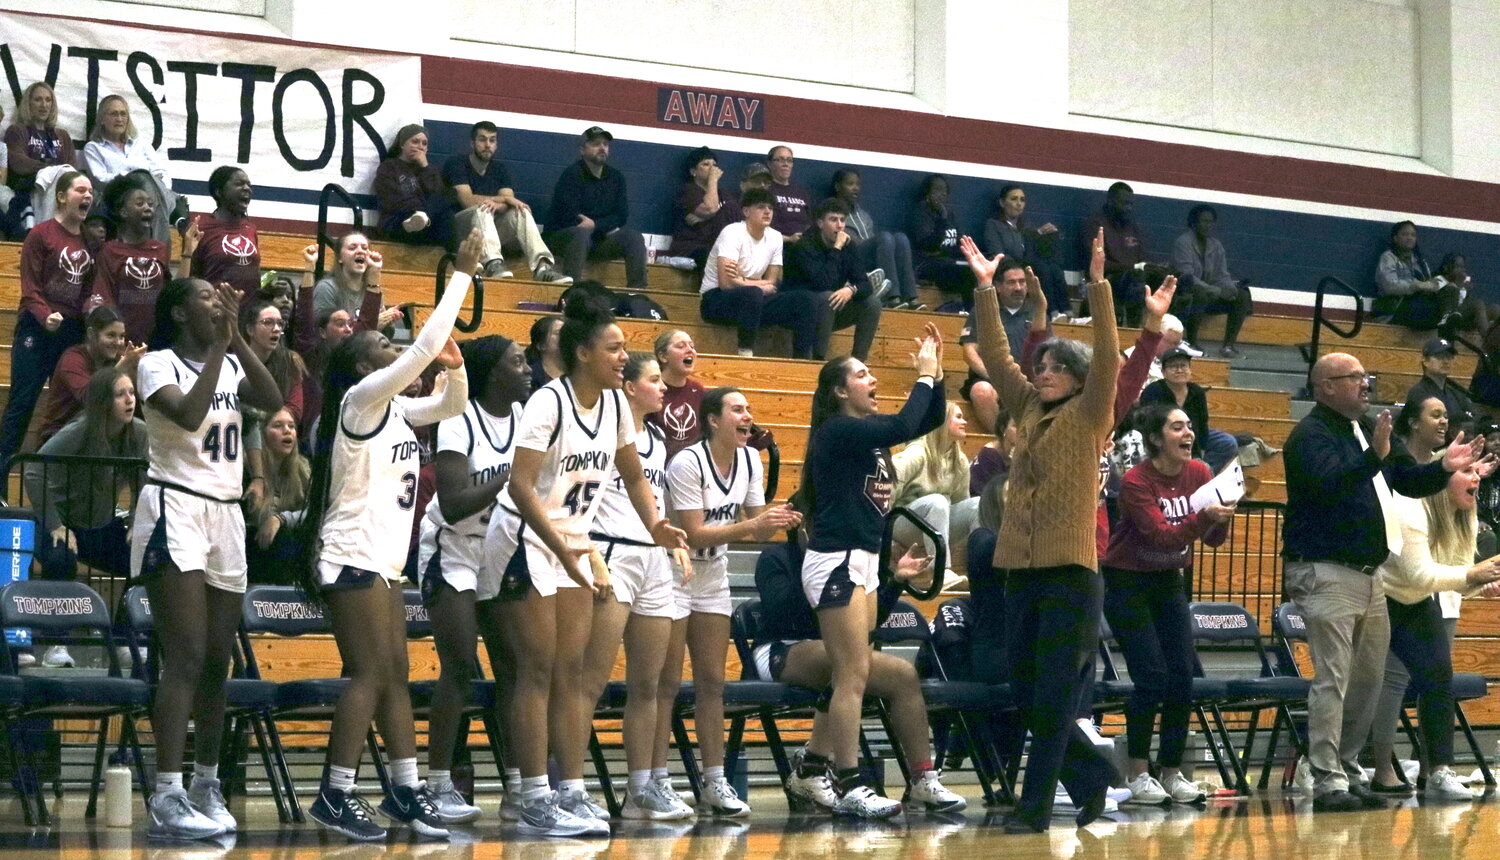 The Tompkins bench celebrates after a 3-pointer during Tuesday's game between Tompkins and Cinco Ranch at the Tompkins gym.